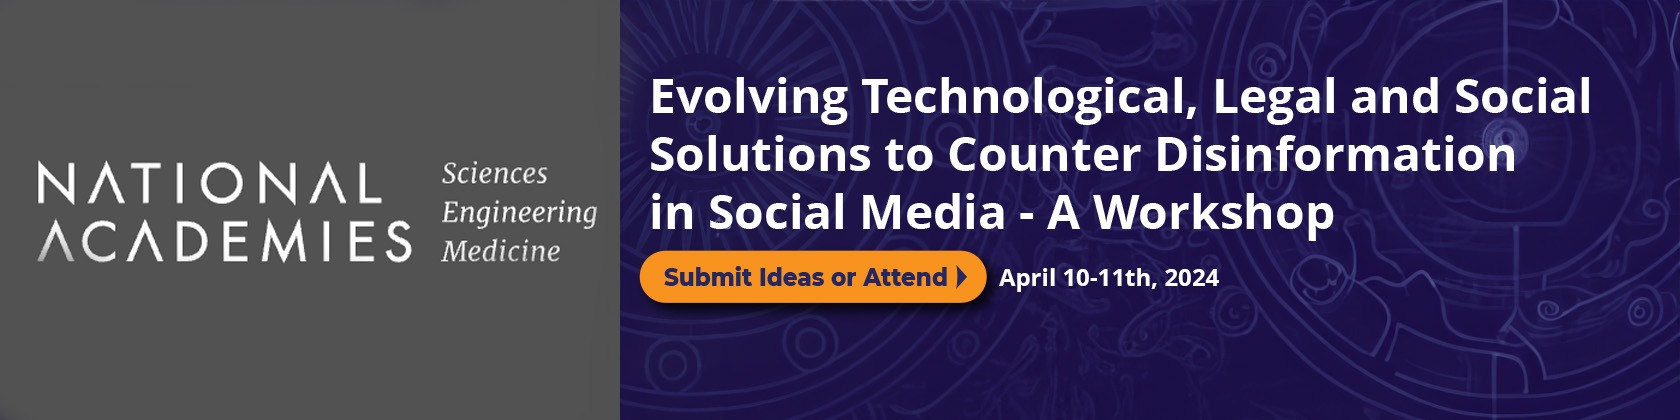 Evolving Technological, Legal and Social Solutions to Counter Disinformation in Social Media - A Workshop